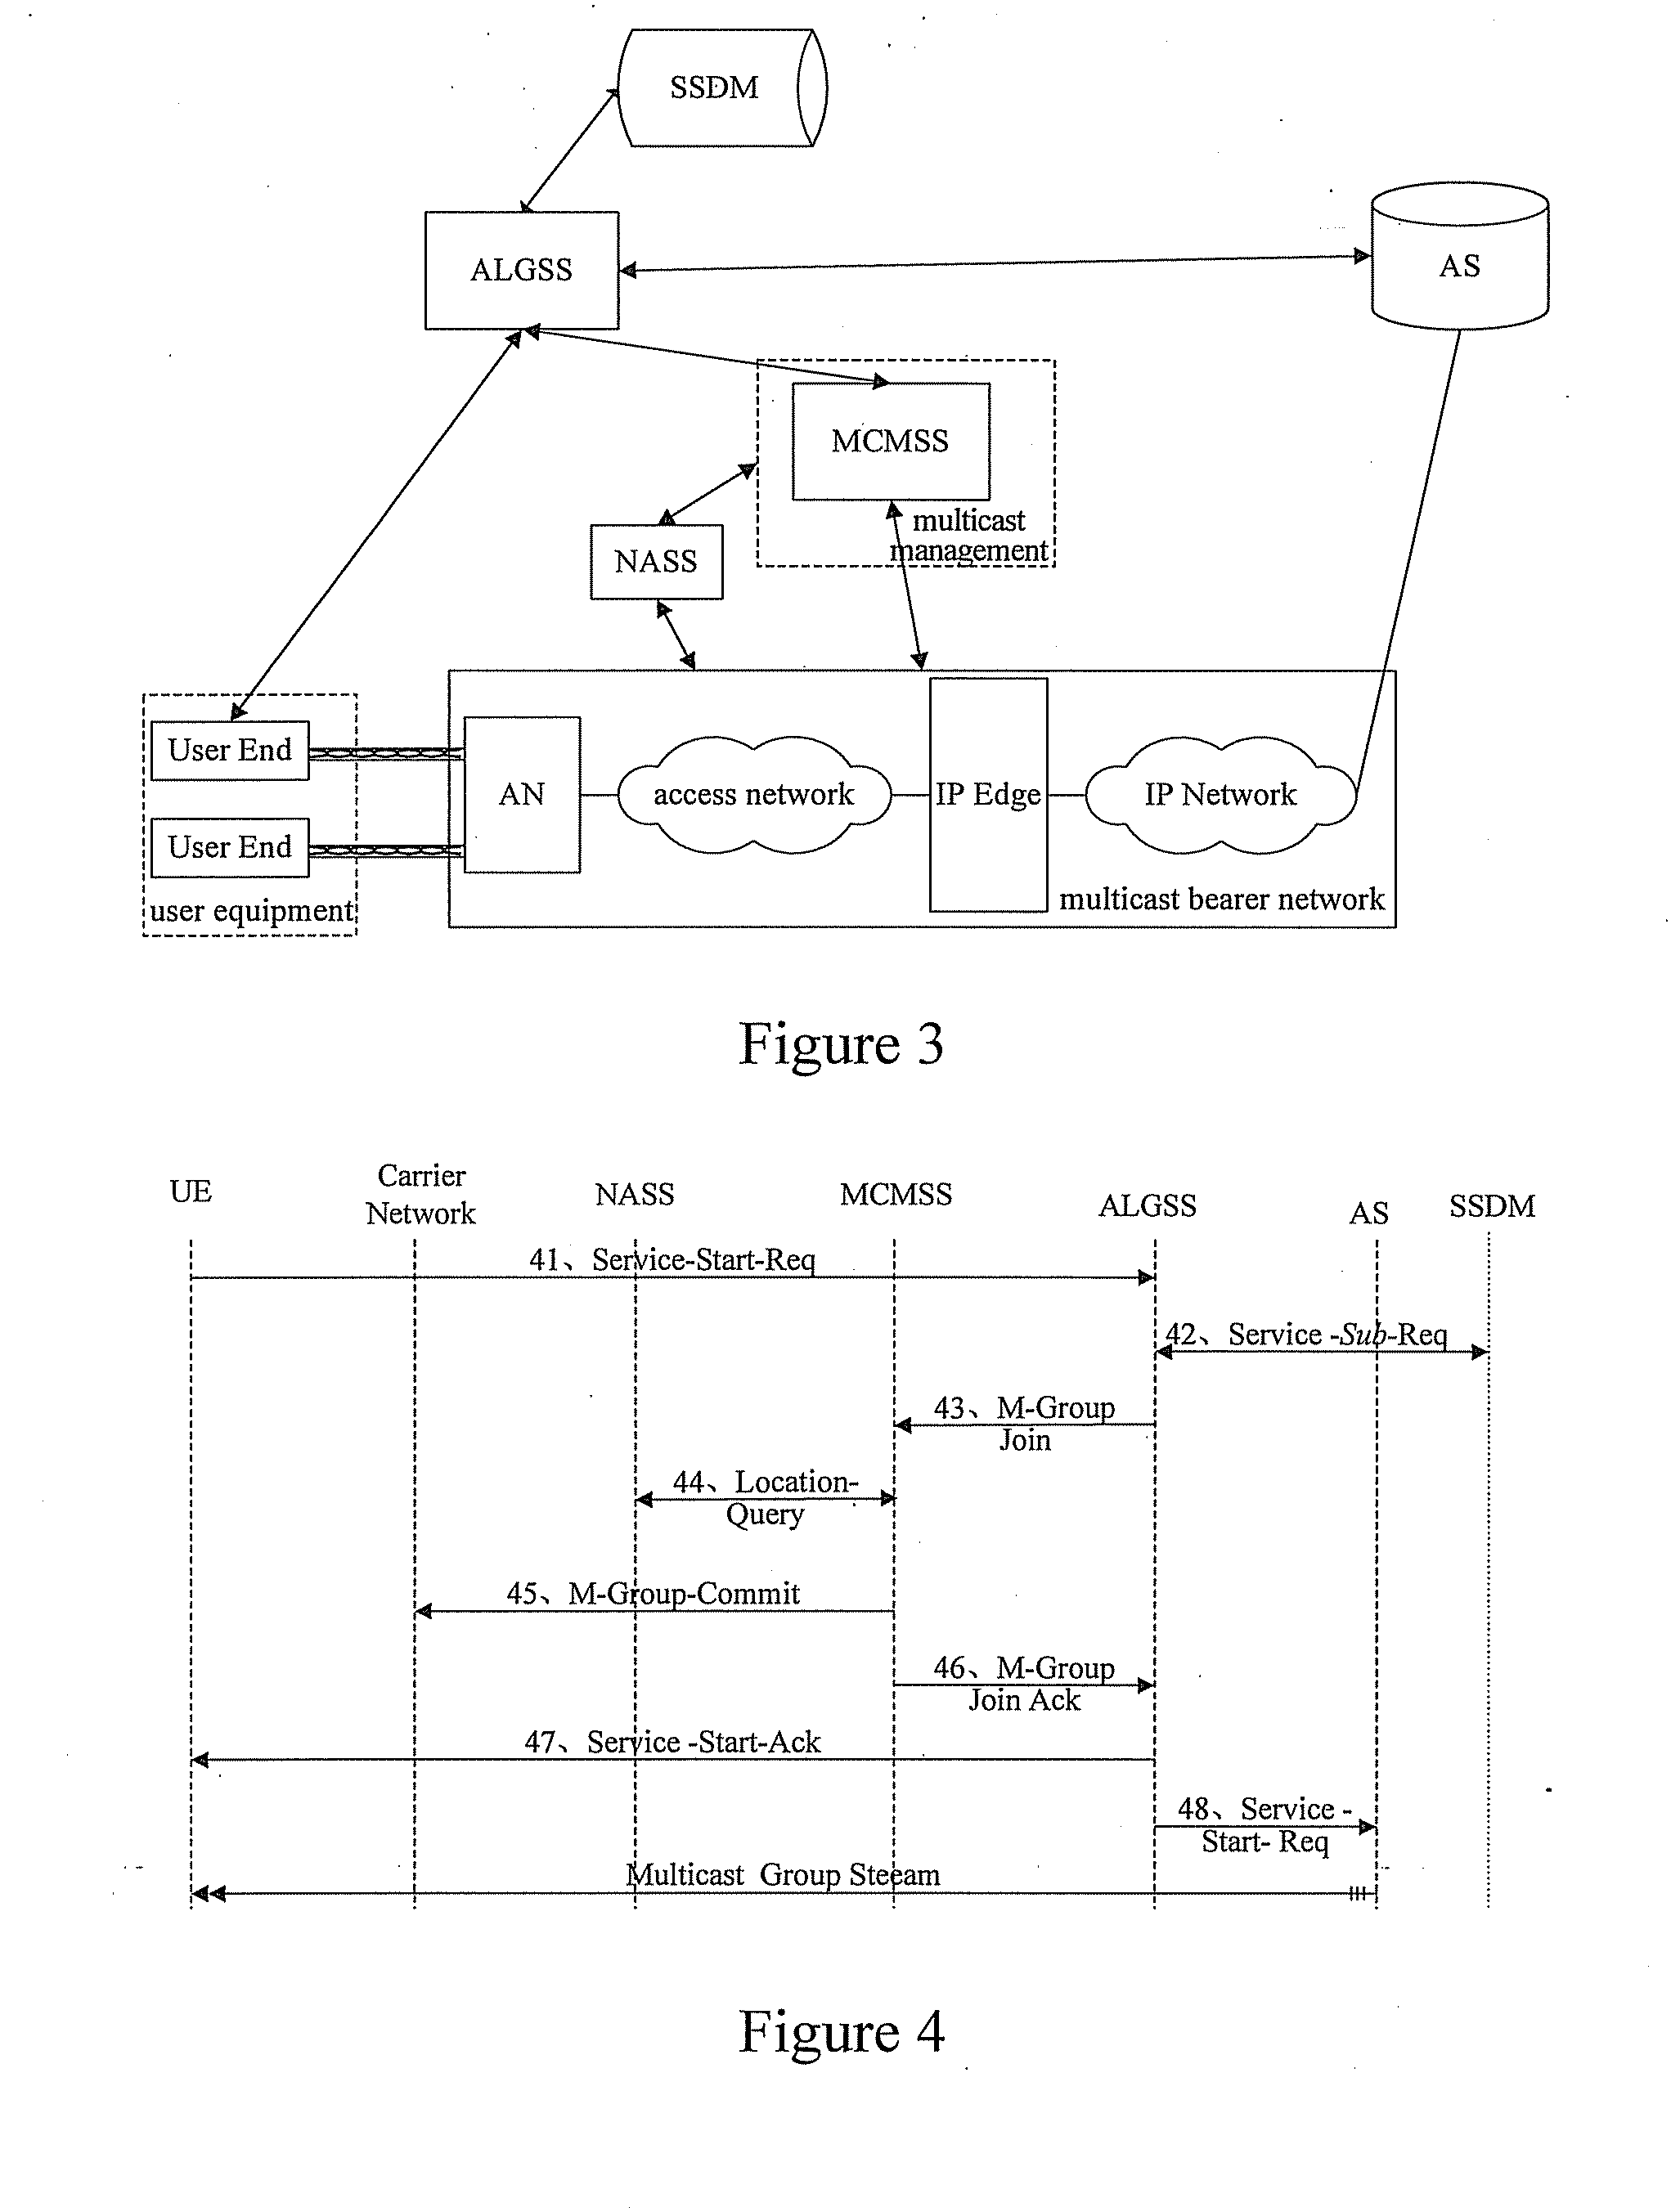 System and method for providing multicast service